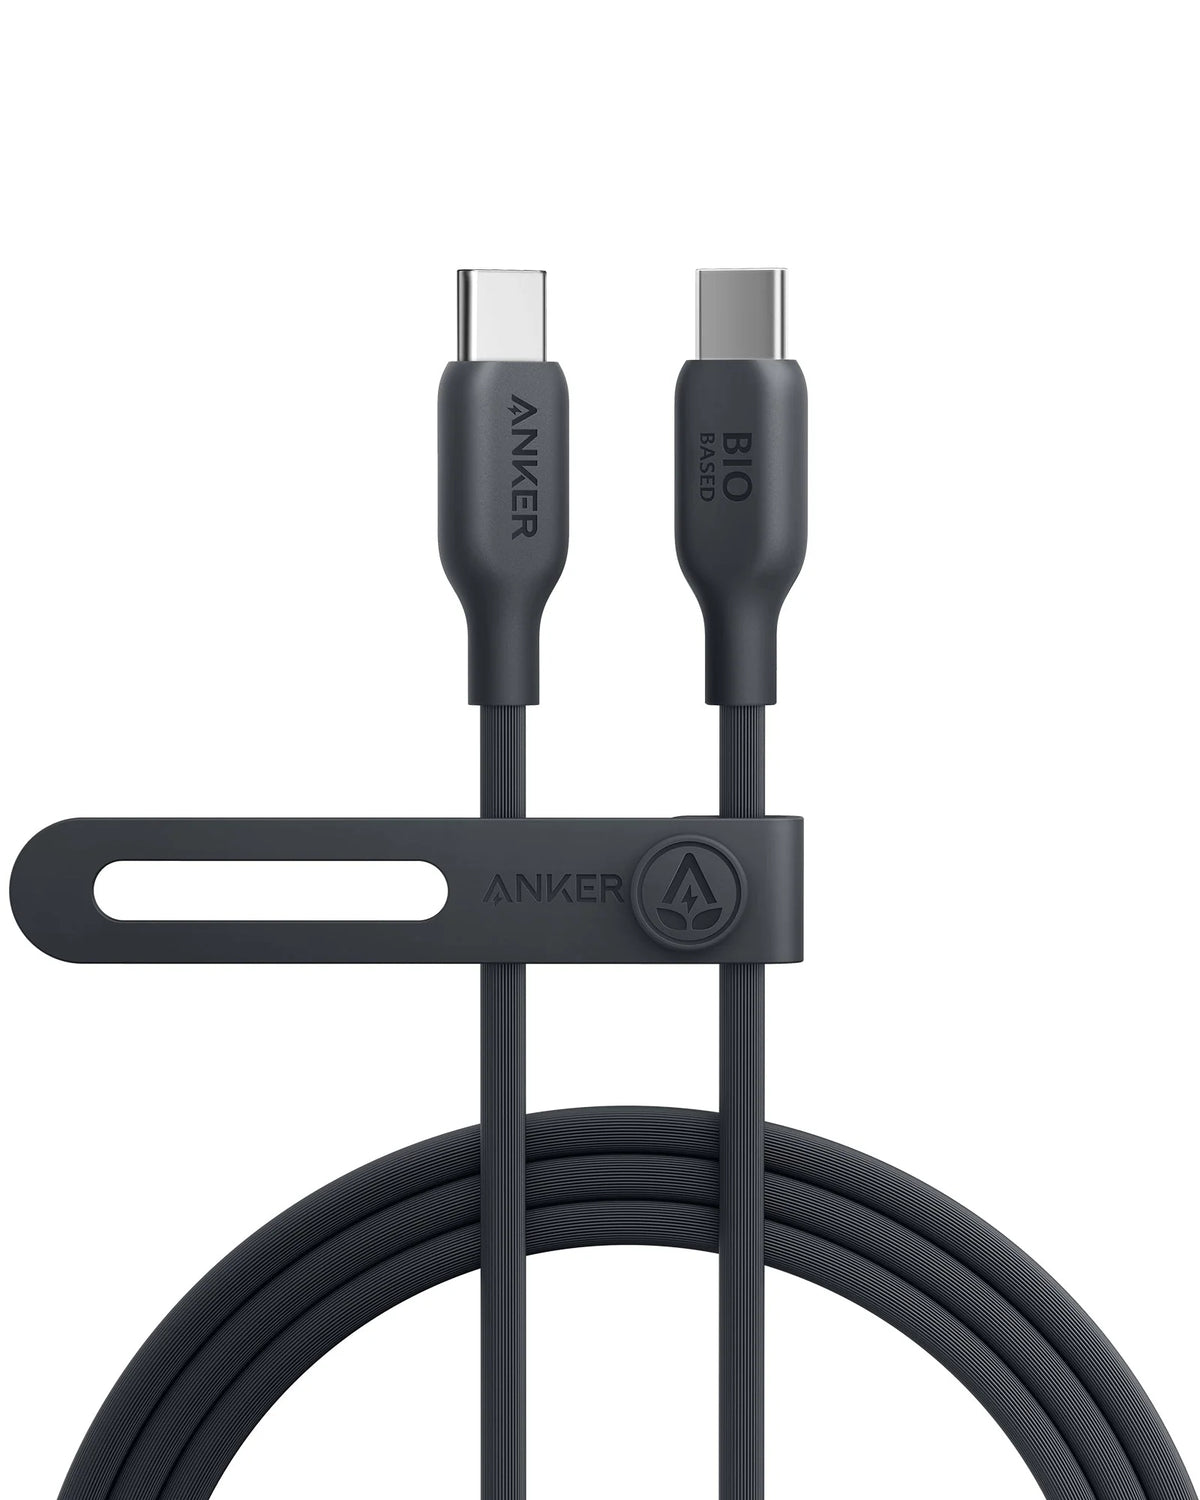 Anker Prime 20,000mAh Power Bank and Anker 543 USB-C to USB-C Cable (Bio-Based) - 2-Pack